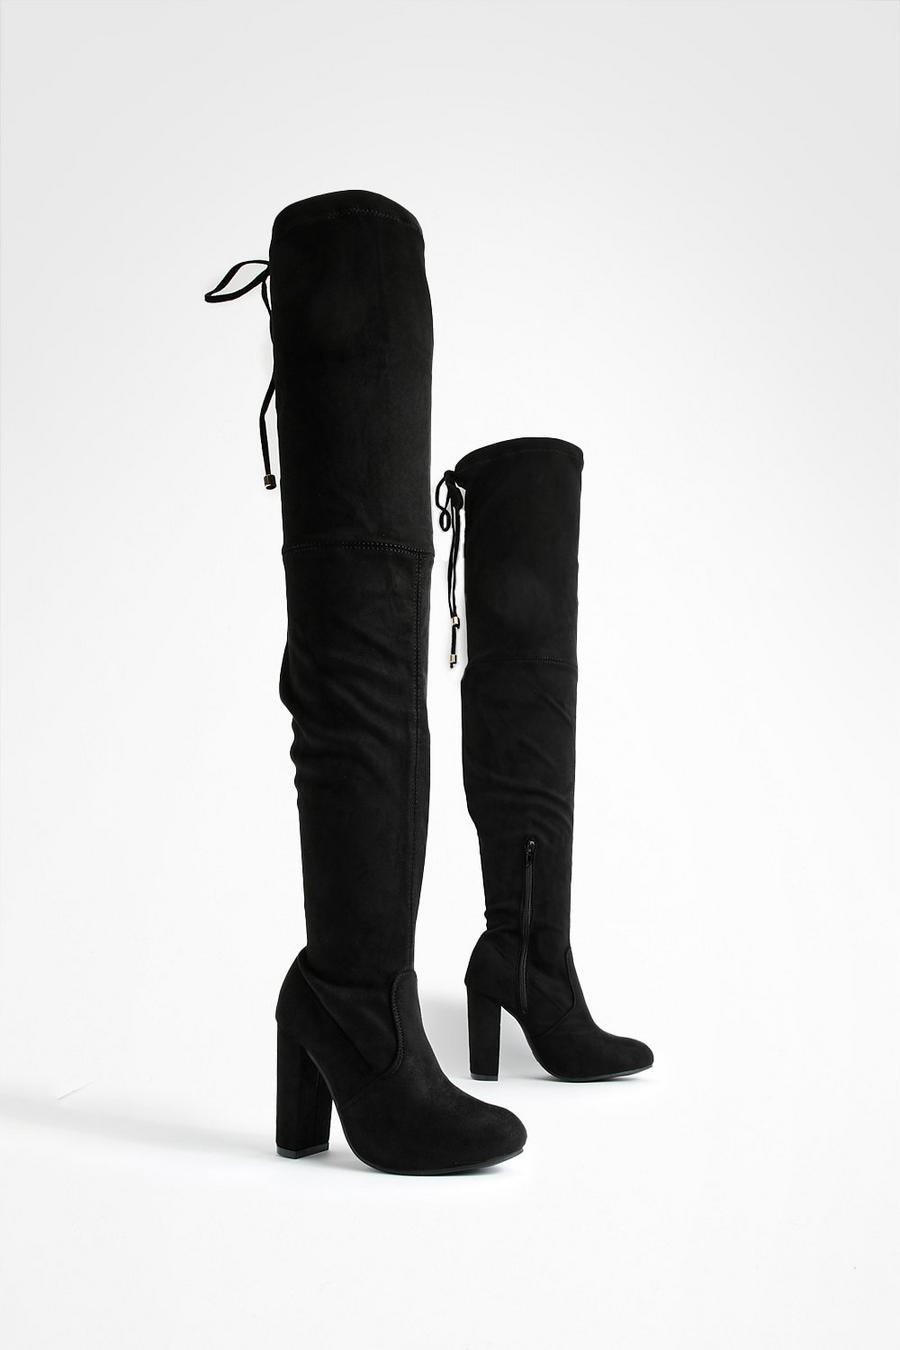 Black Wide Fit Block Heel Thigh High Boots